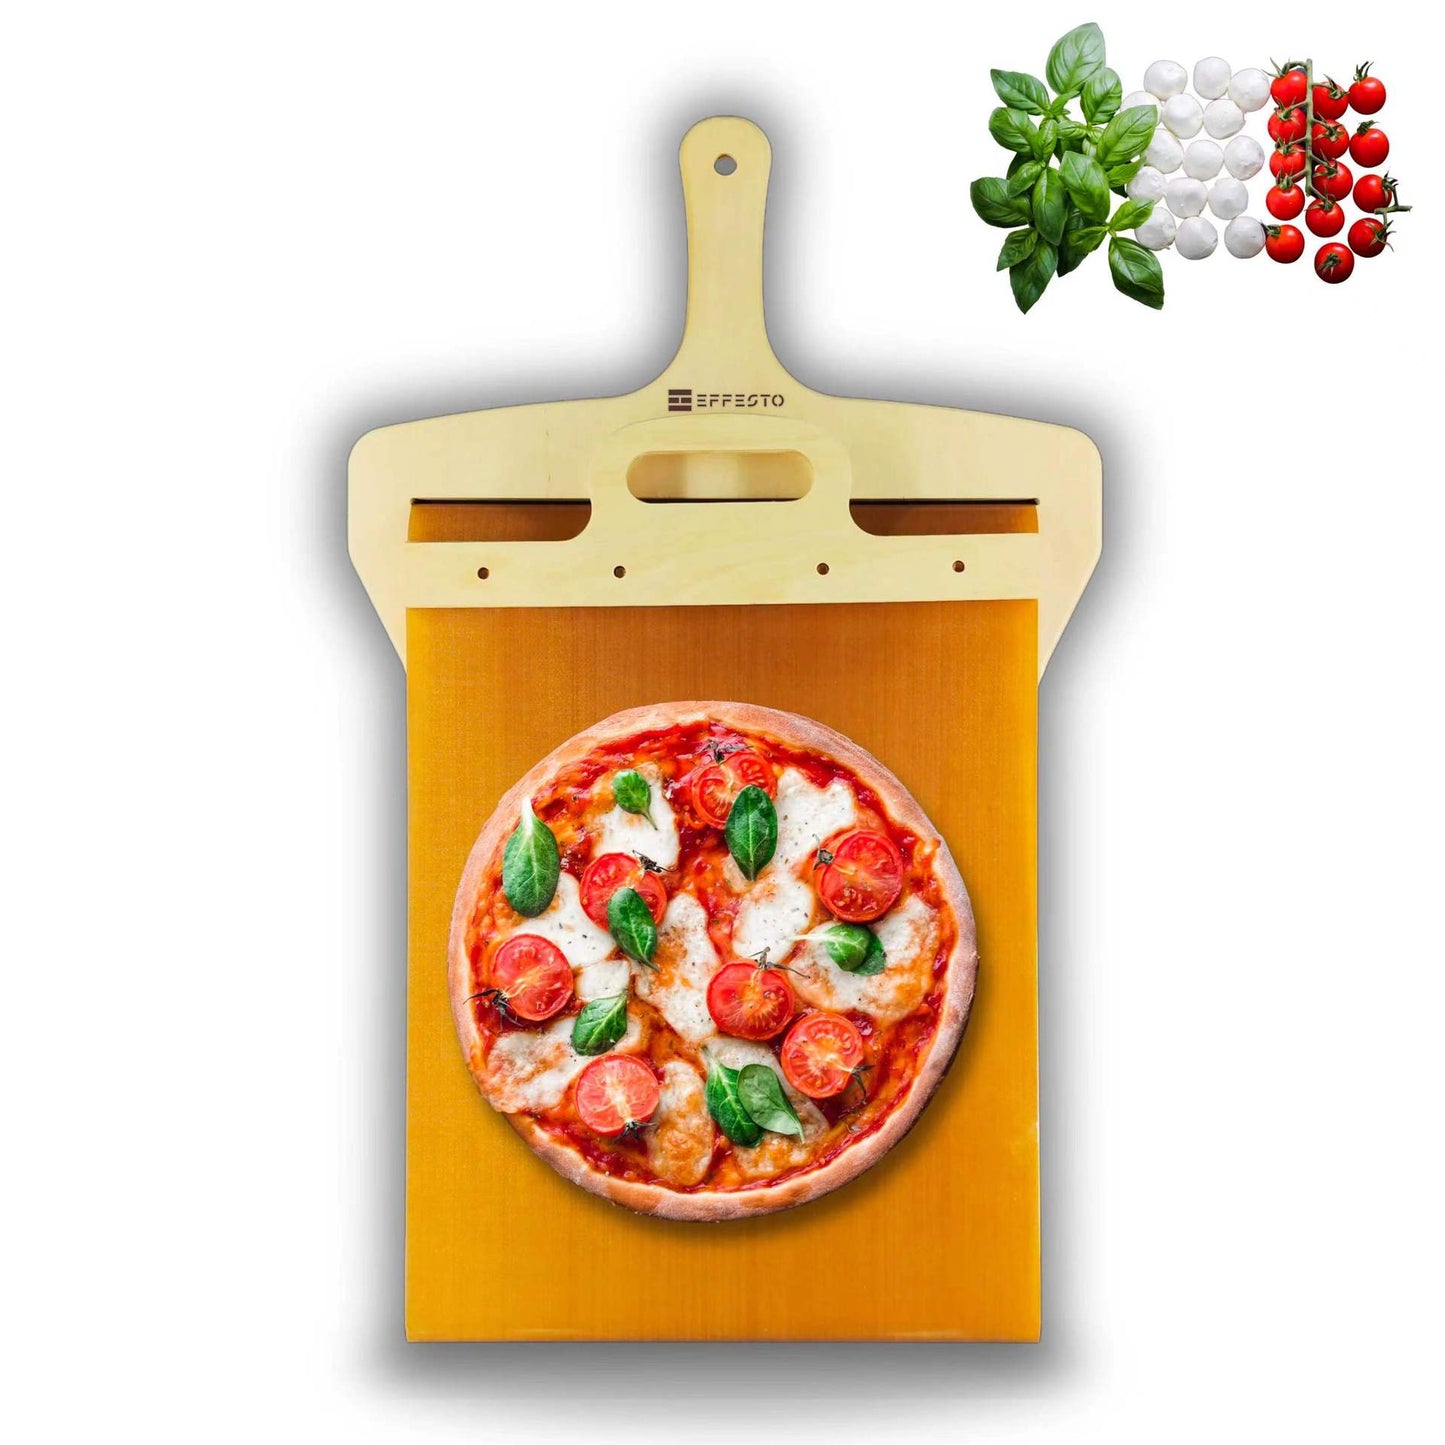 Sliding pizza peel. Non-stick smooth pizza cutting board. Storage transfer cutting board. Kitchen cooking tool